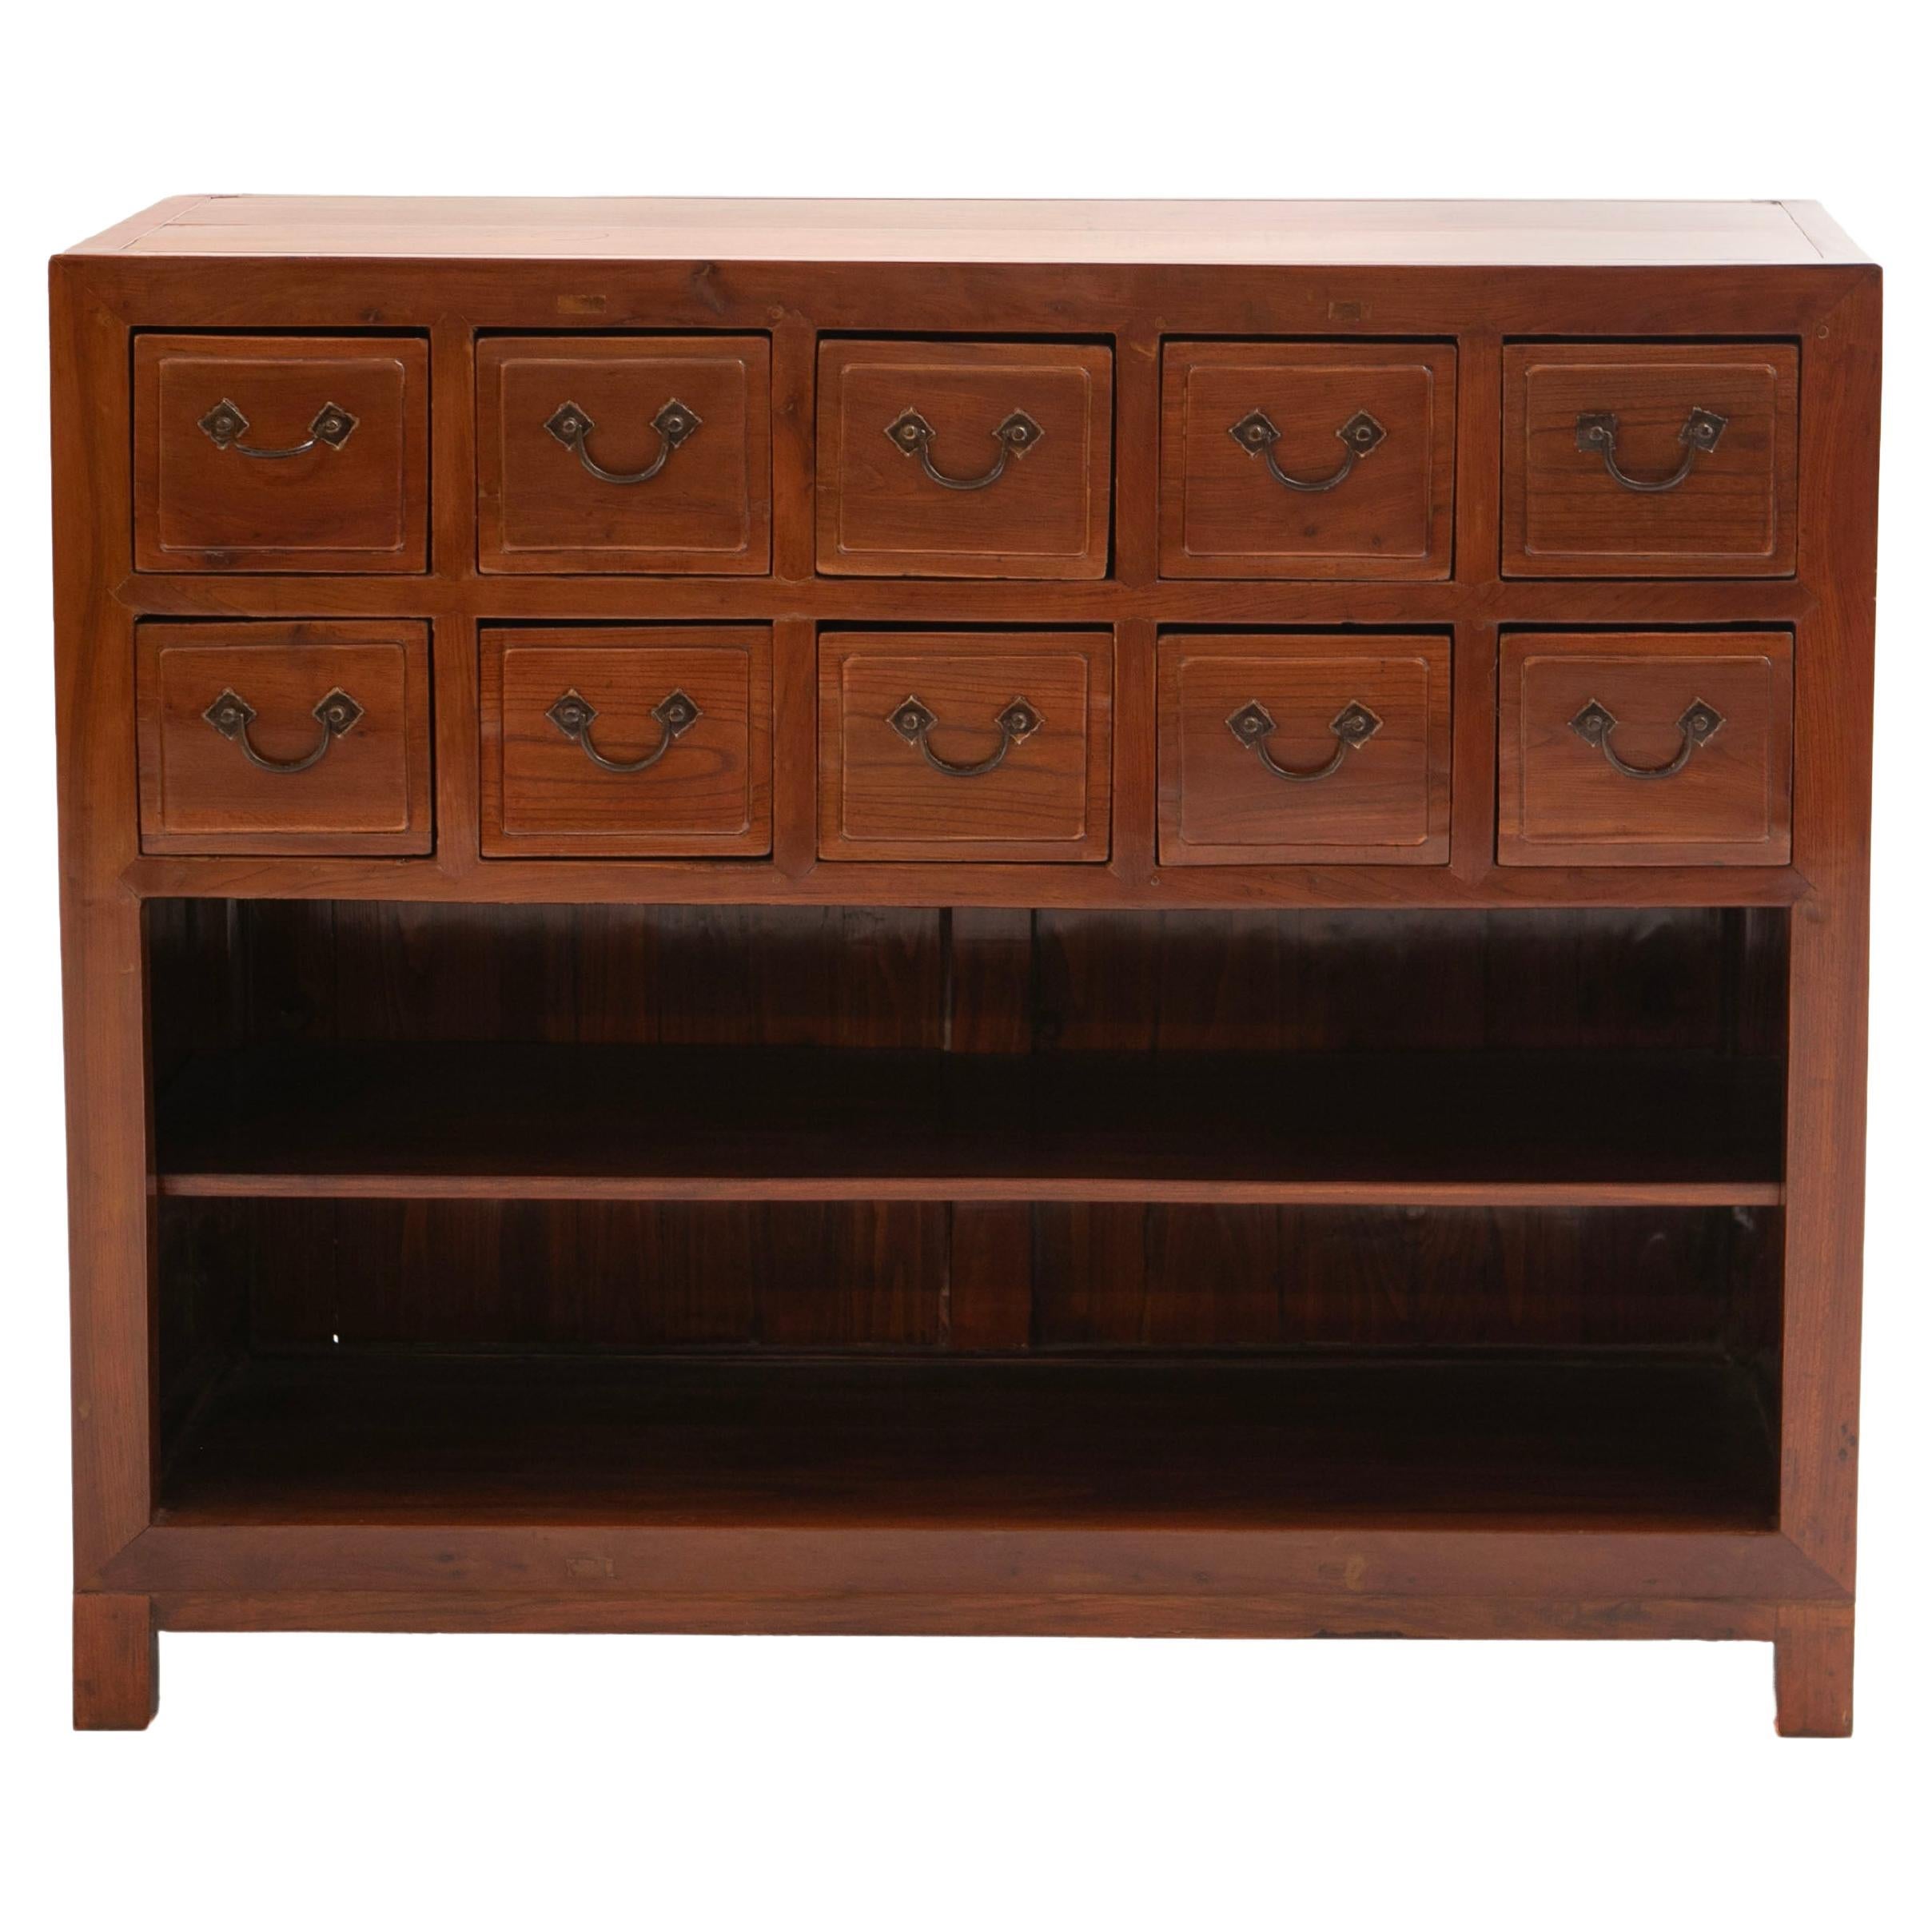 Chinese Herbal Apothecary Chest And Bookcase, Late 19th Century